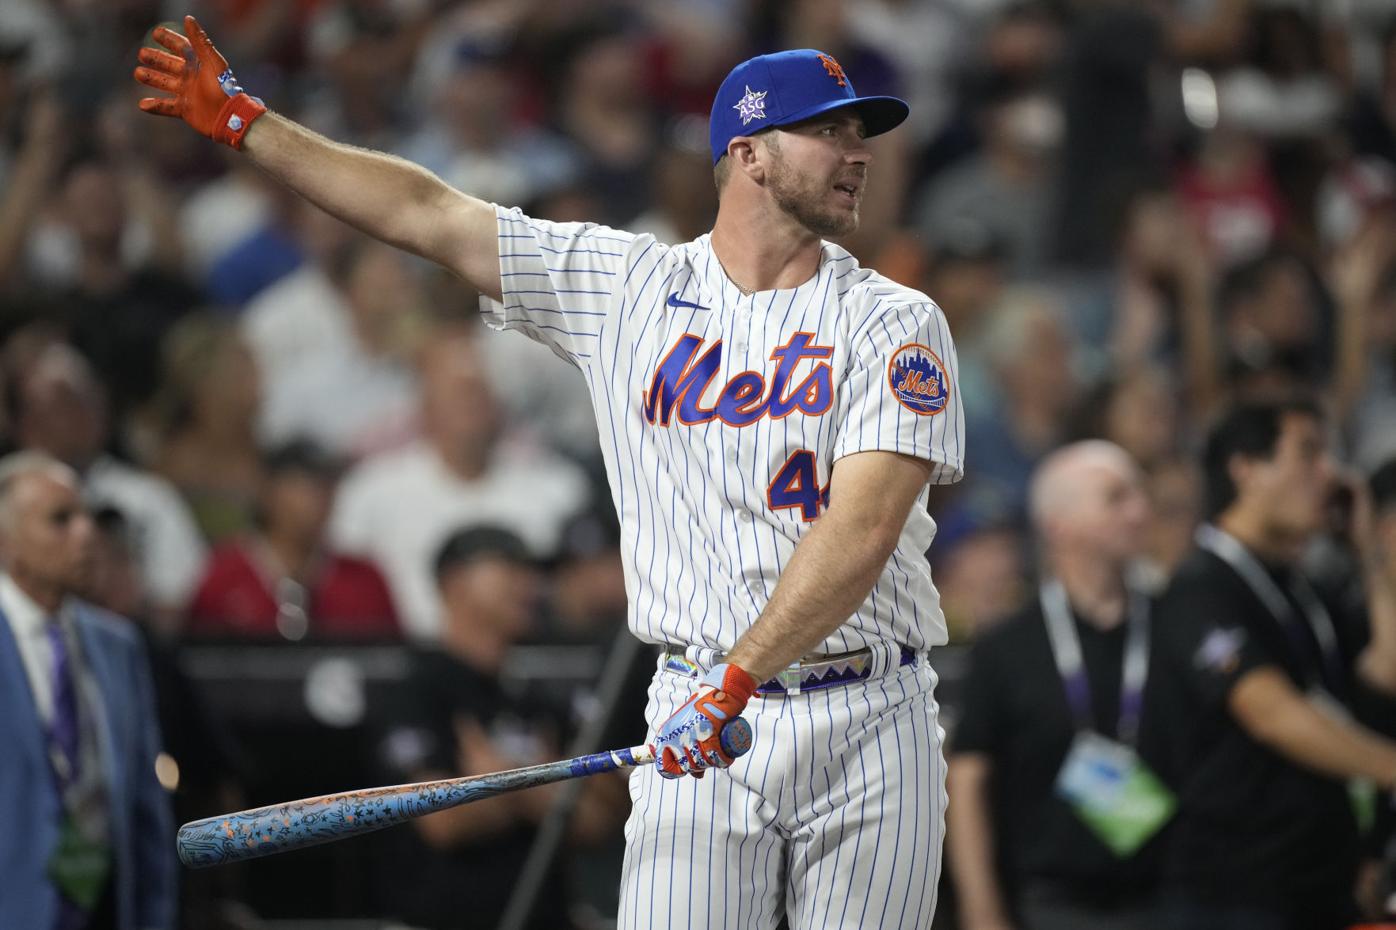 pete alonso polar bear pete for everyone, fans, lovers Essential